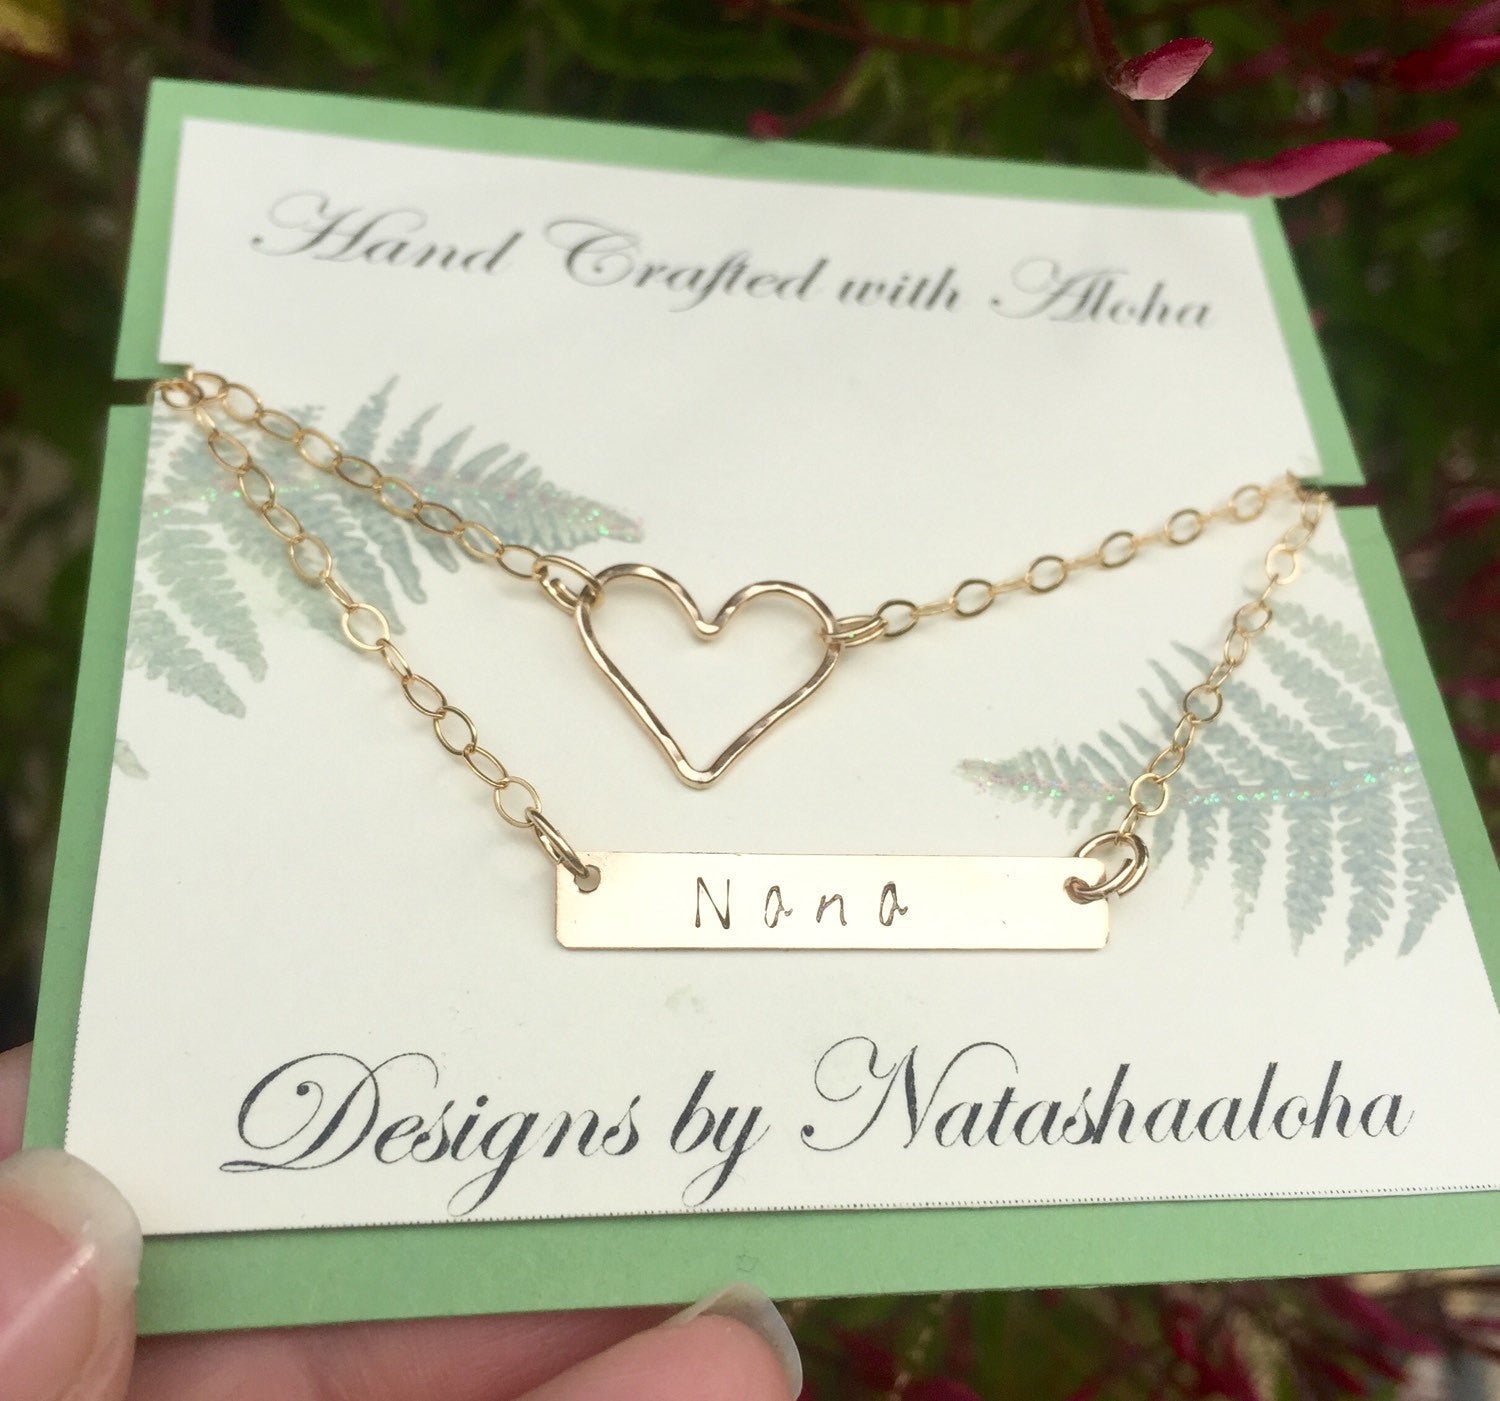 Monogram Necklace, Gold Bar Necklace, Nana Necklace, Personalized Necklace, Bar Necklace, Personalized Heart Necklace,  natashaaloha - Natashaaloha, jewelry, bracelets, necklace, keychains, fishing lures, gifts for men, charms, personalized, 